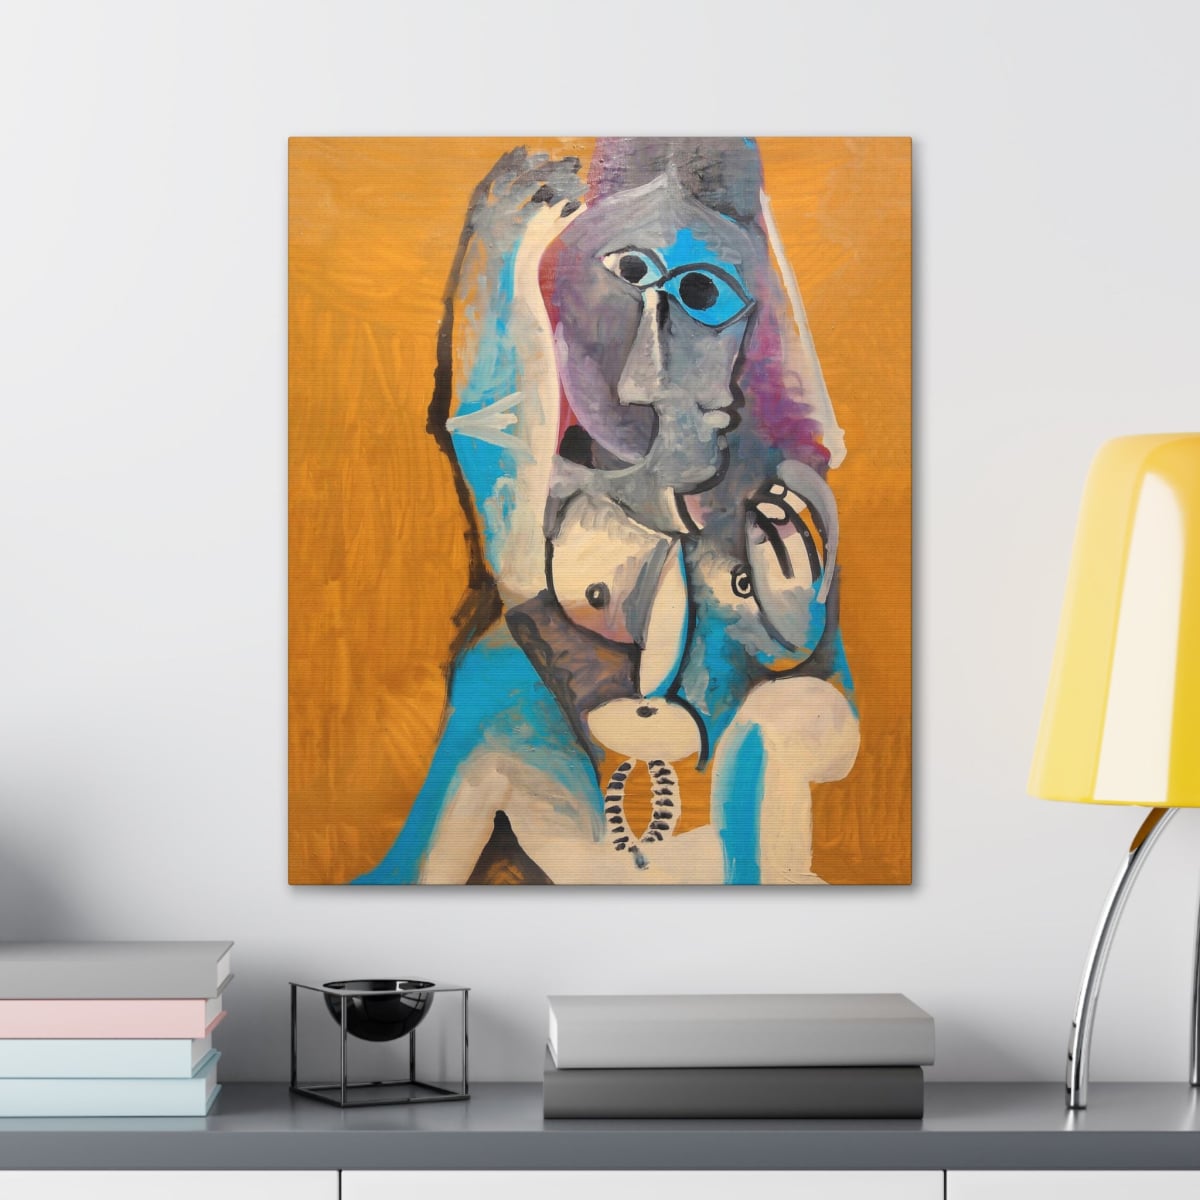 Gallery Wrap Painting Modern Wall Decor